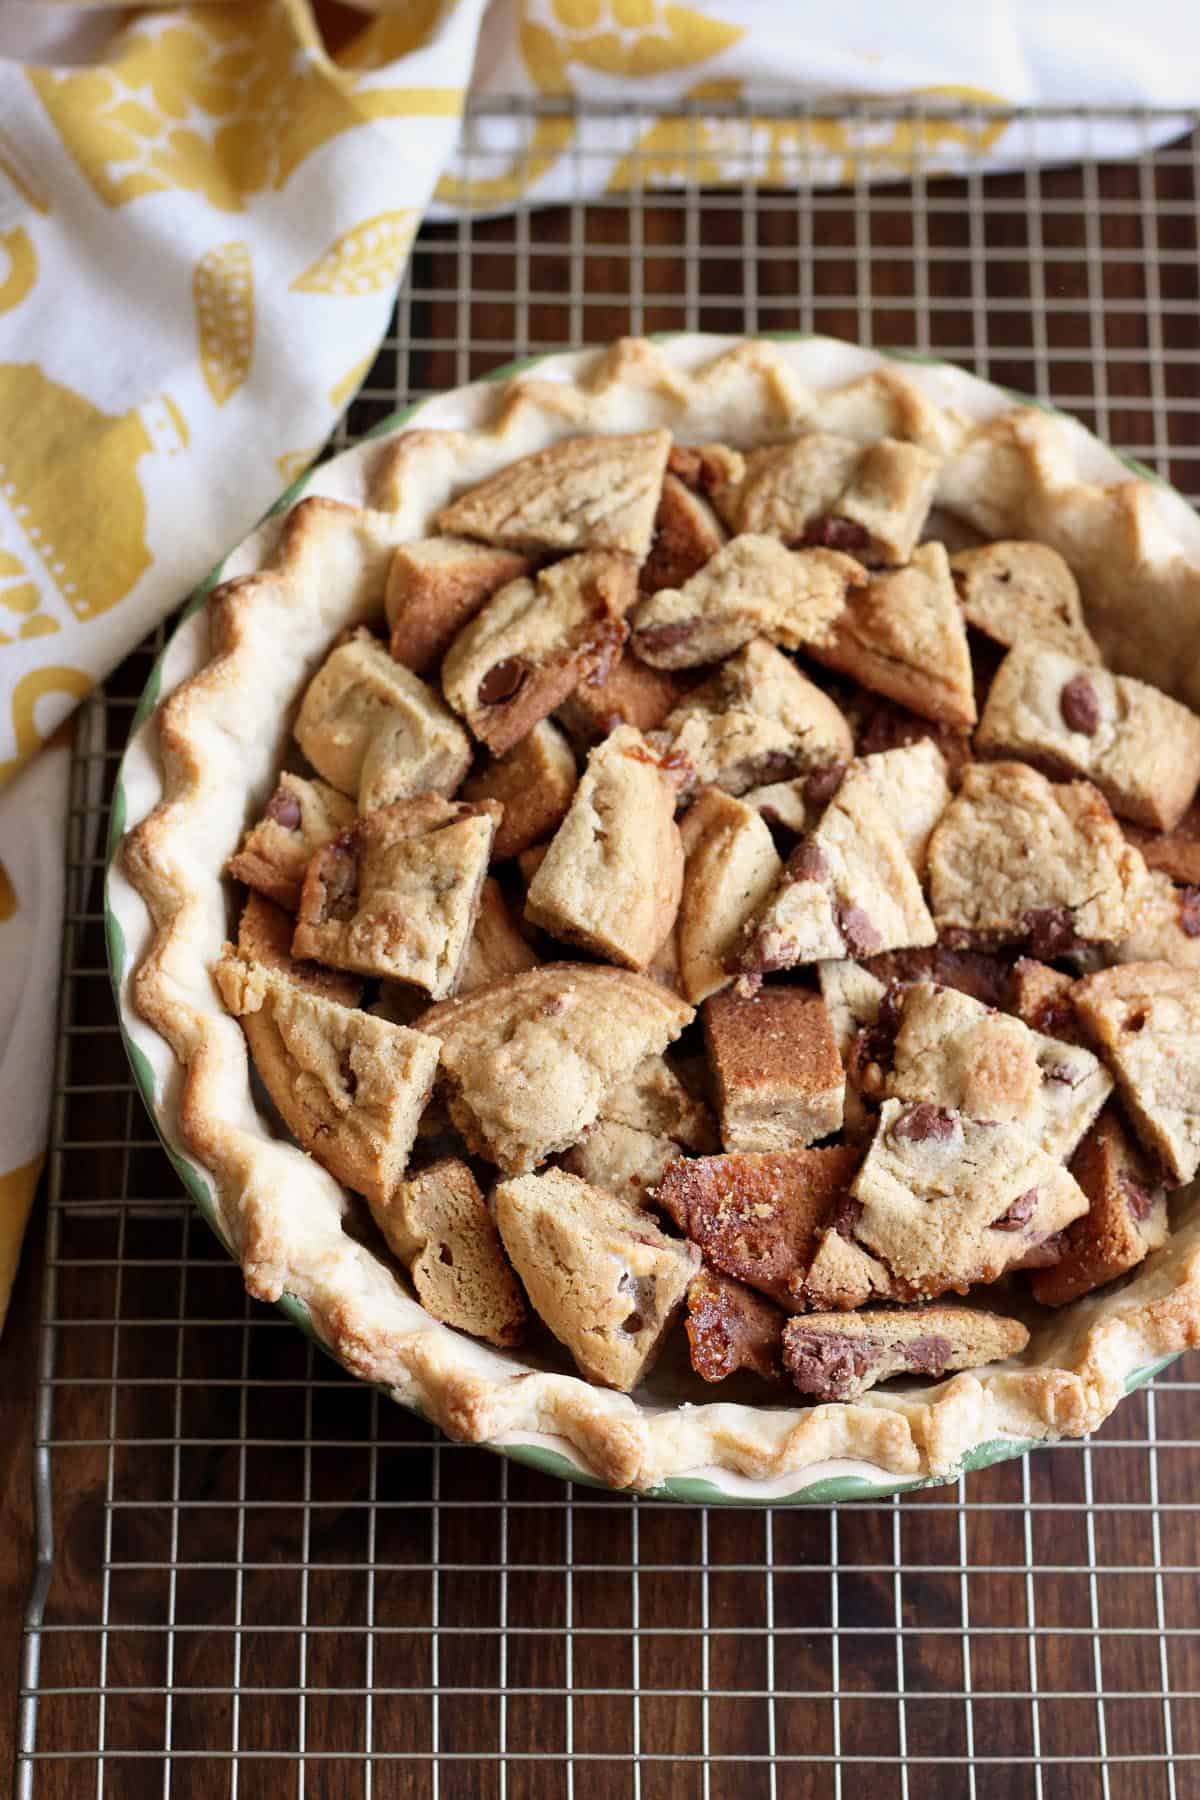 Chocolate chip cookie pieces inside a pie crust.